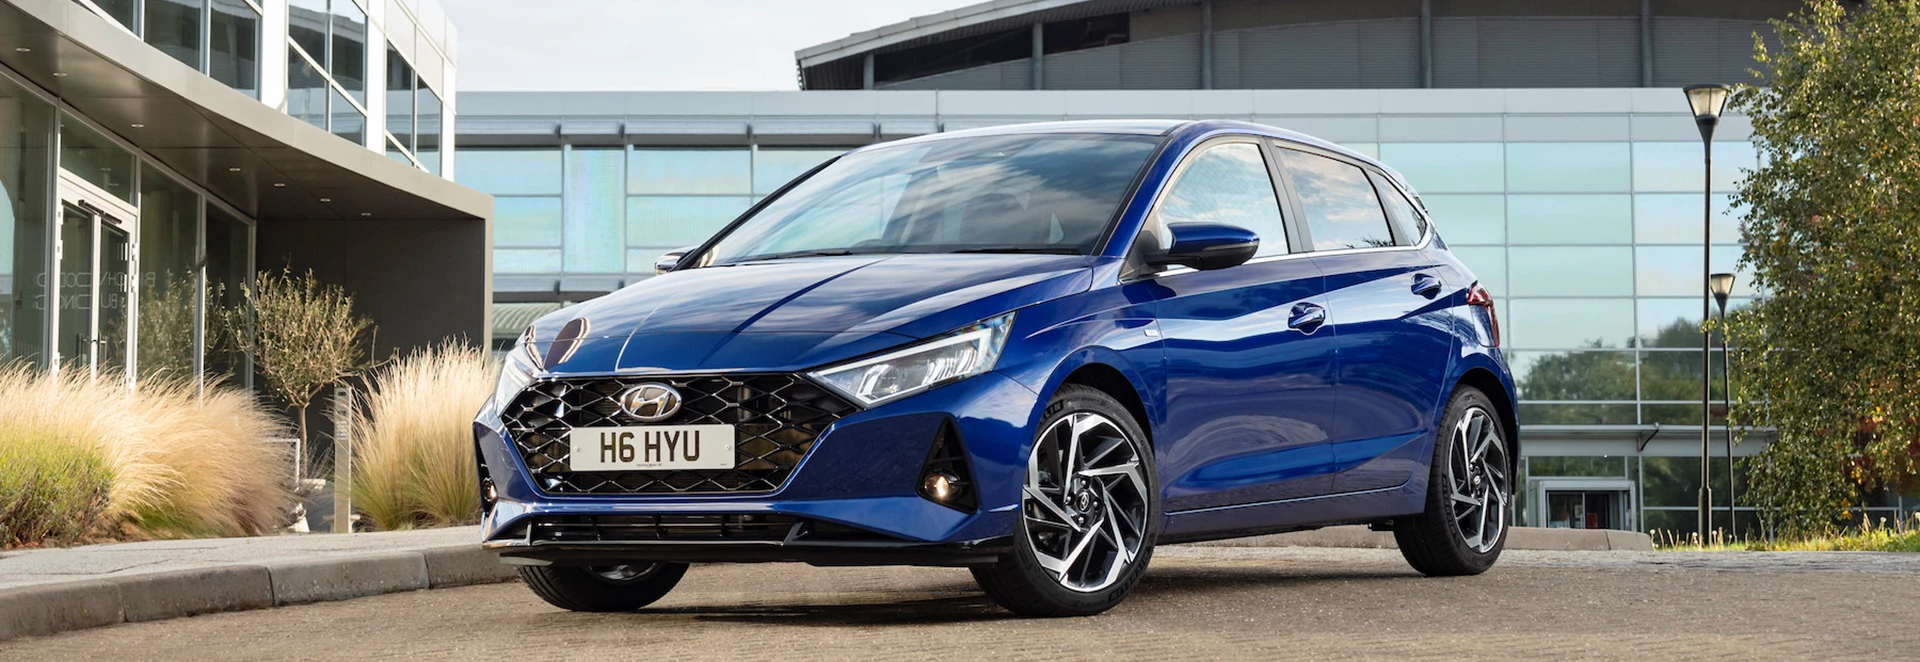 Buyer’s guide to the 2021 Hyundai i20 